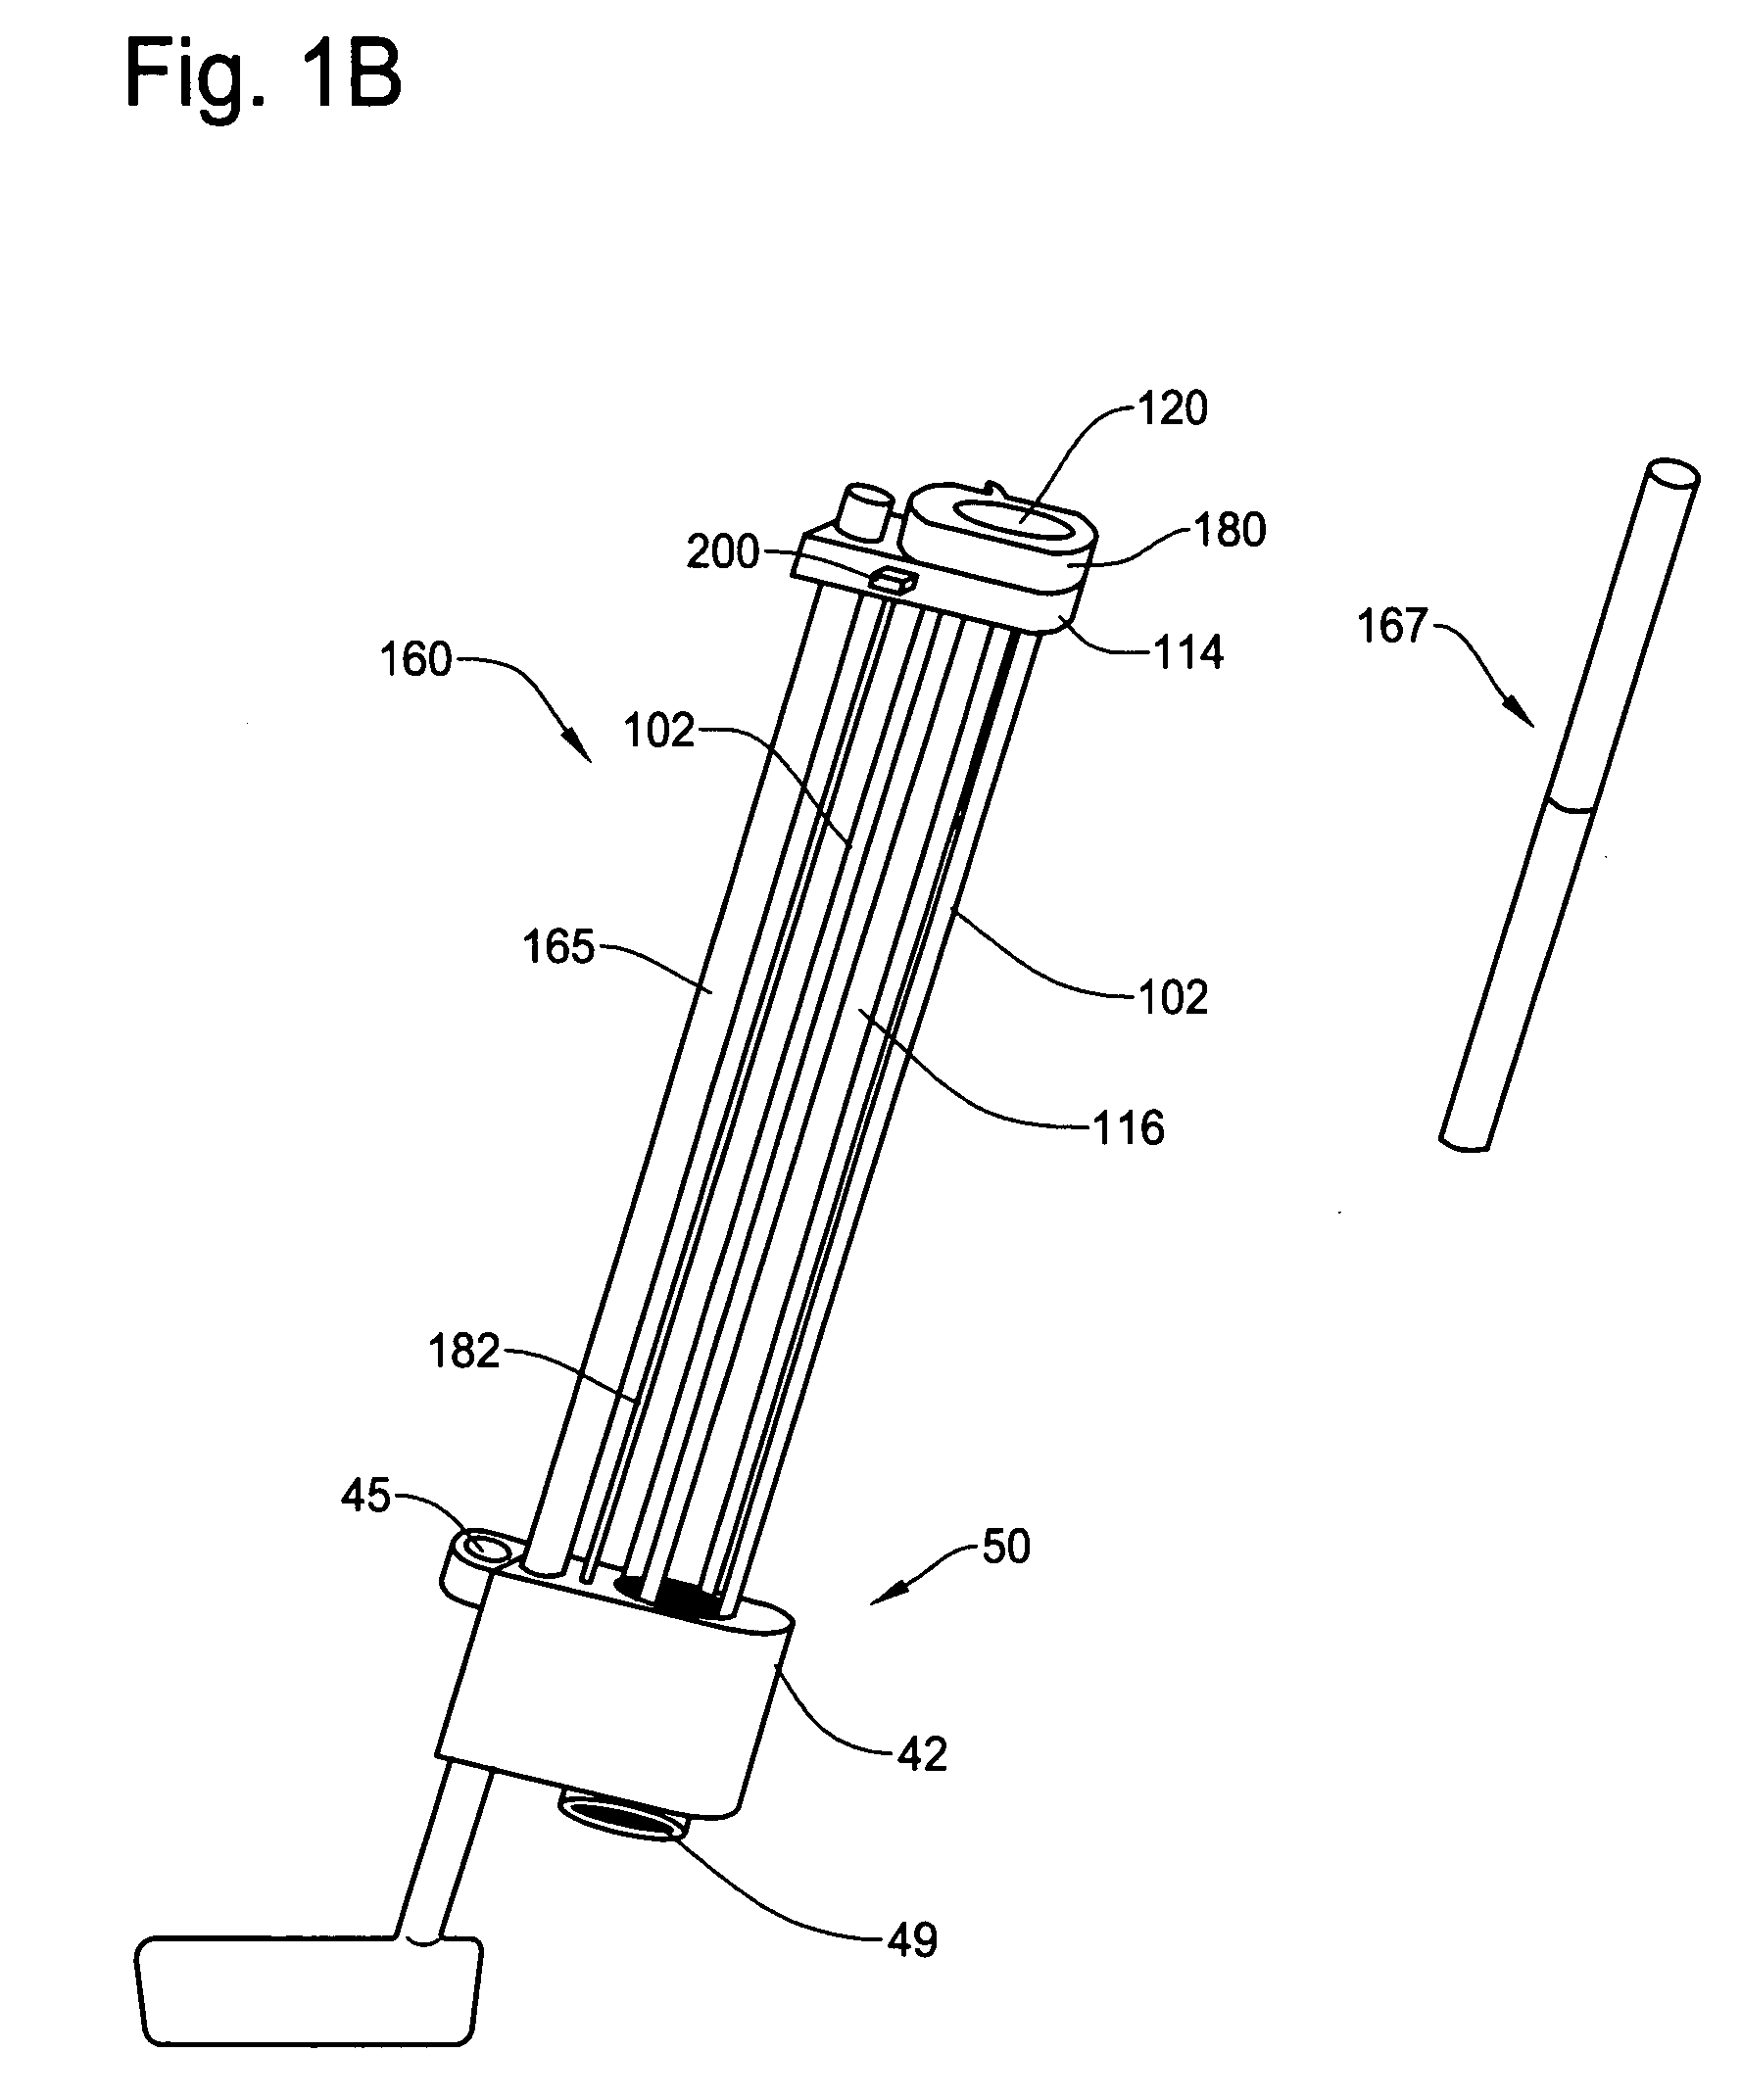 Game apparatus having ball drop and pick-up mechanism